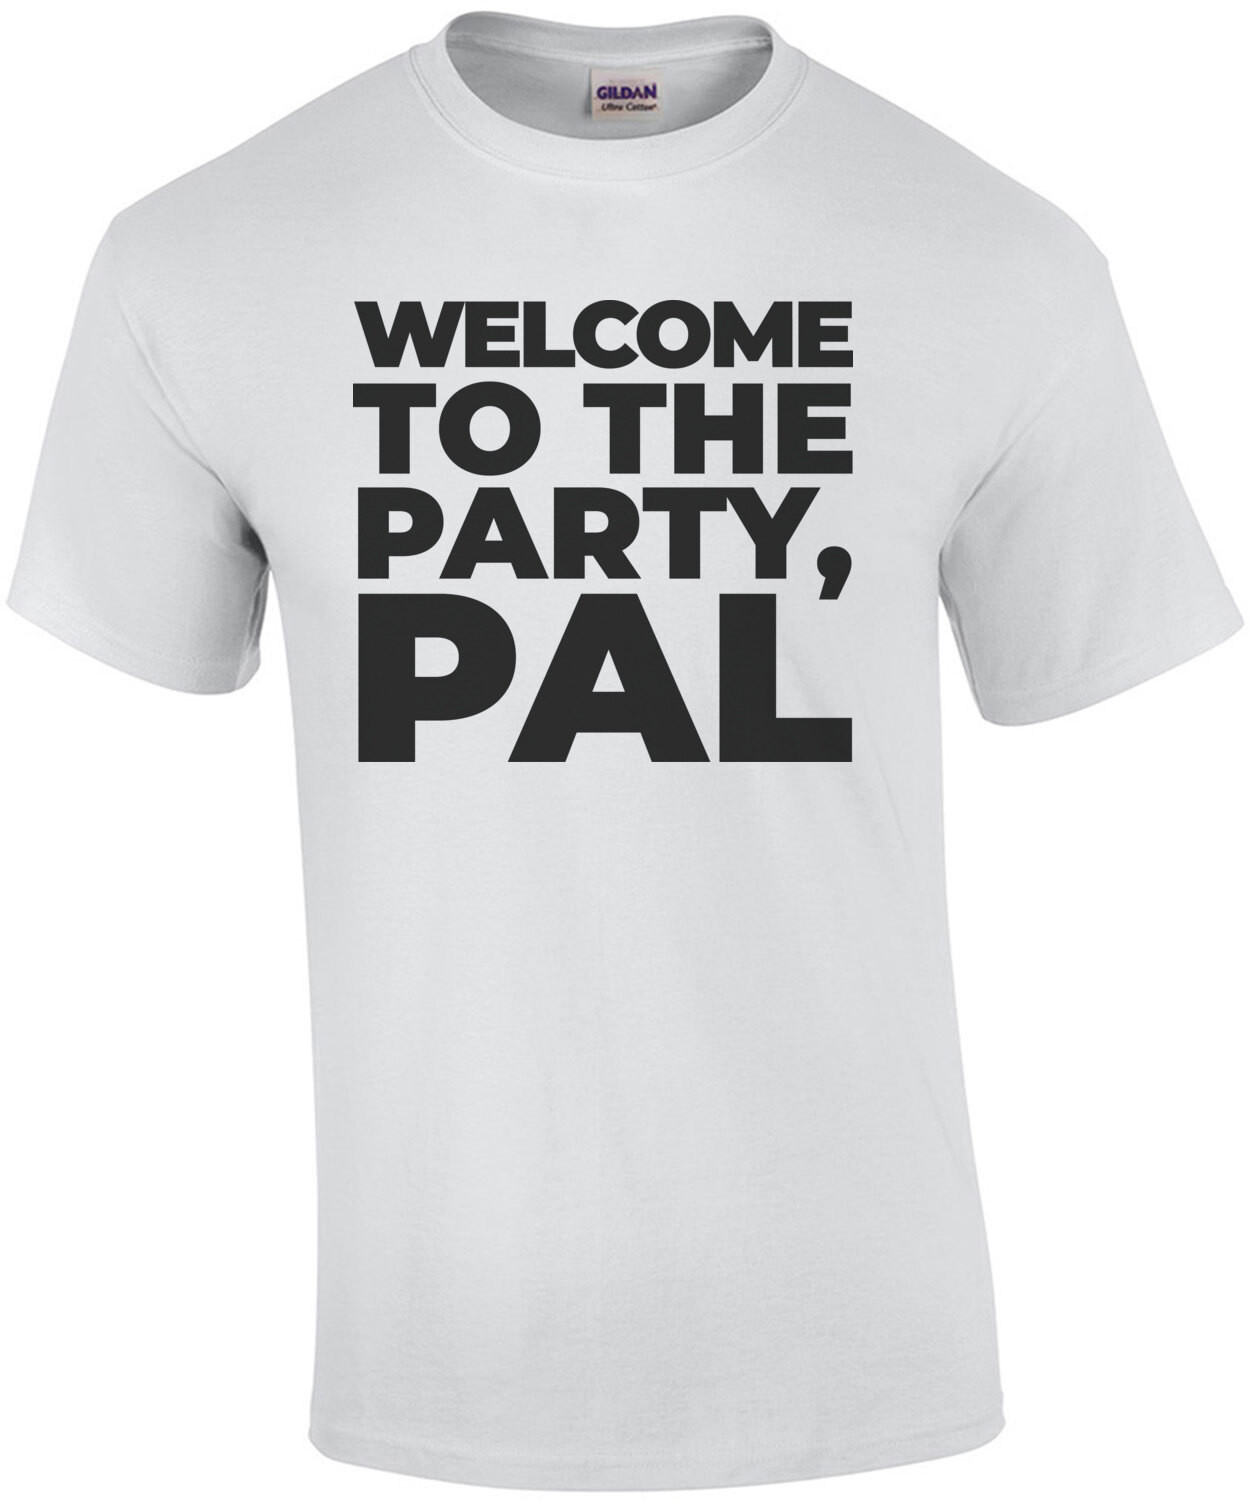 Welcome to the party, pal. Funny Die Hard Quote - 80's T-Shirt